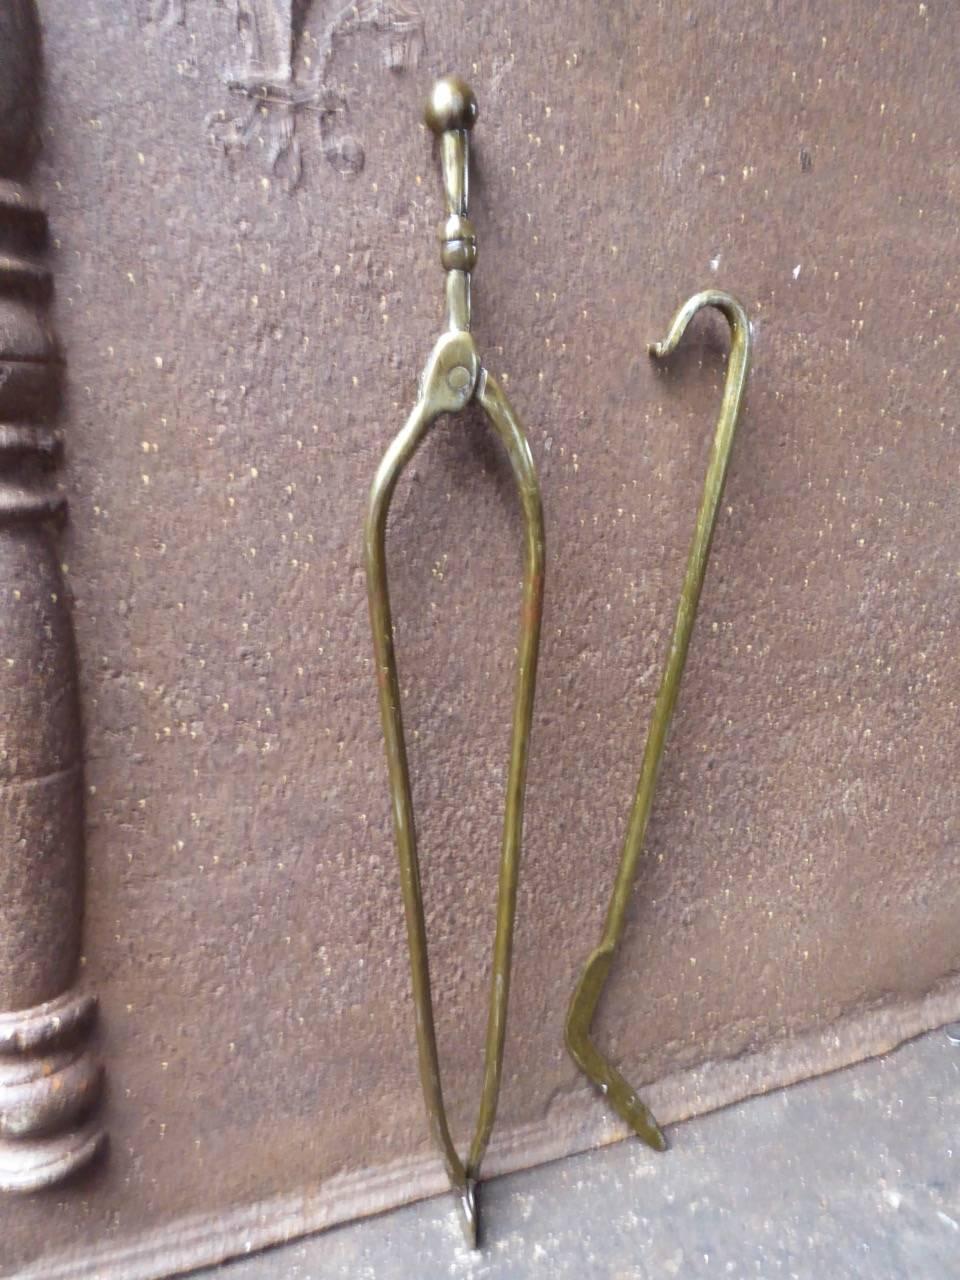 18th-19th century Dutch fireplace tool set - fire irons made of wrought iron. The set is painted in brass color.

We have a unique and specialized collection of antique and used fireplace accessories consisting of more than 1000 listings at 1stdibs.